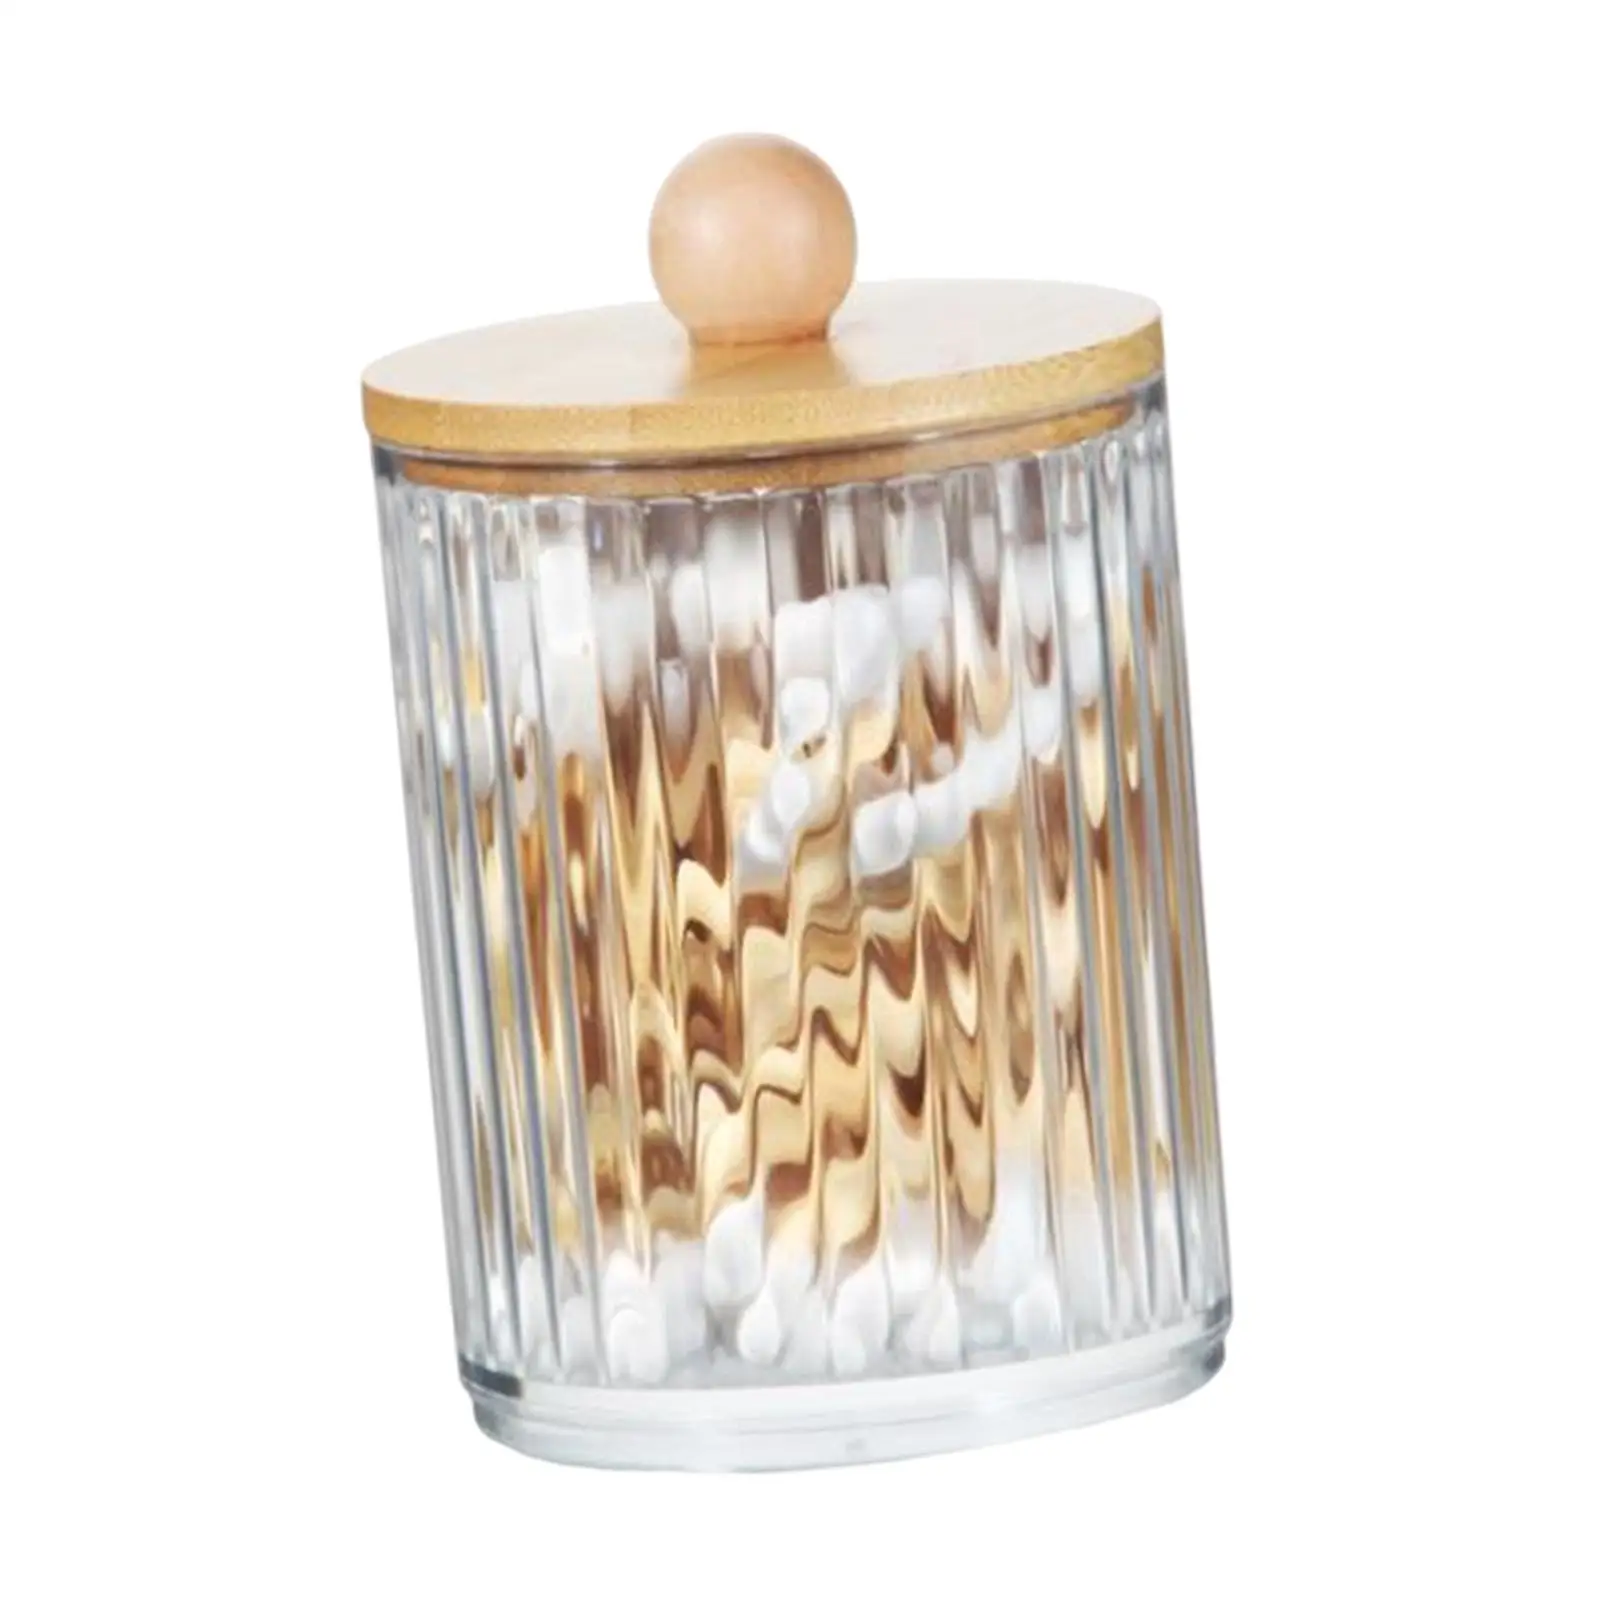 Clear Cotton Swab Holder Bathroom Storage Canister Acrylic Jar with Bamboo Lid Storage for Living Room Kitchen Dining Room Table